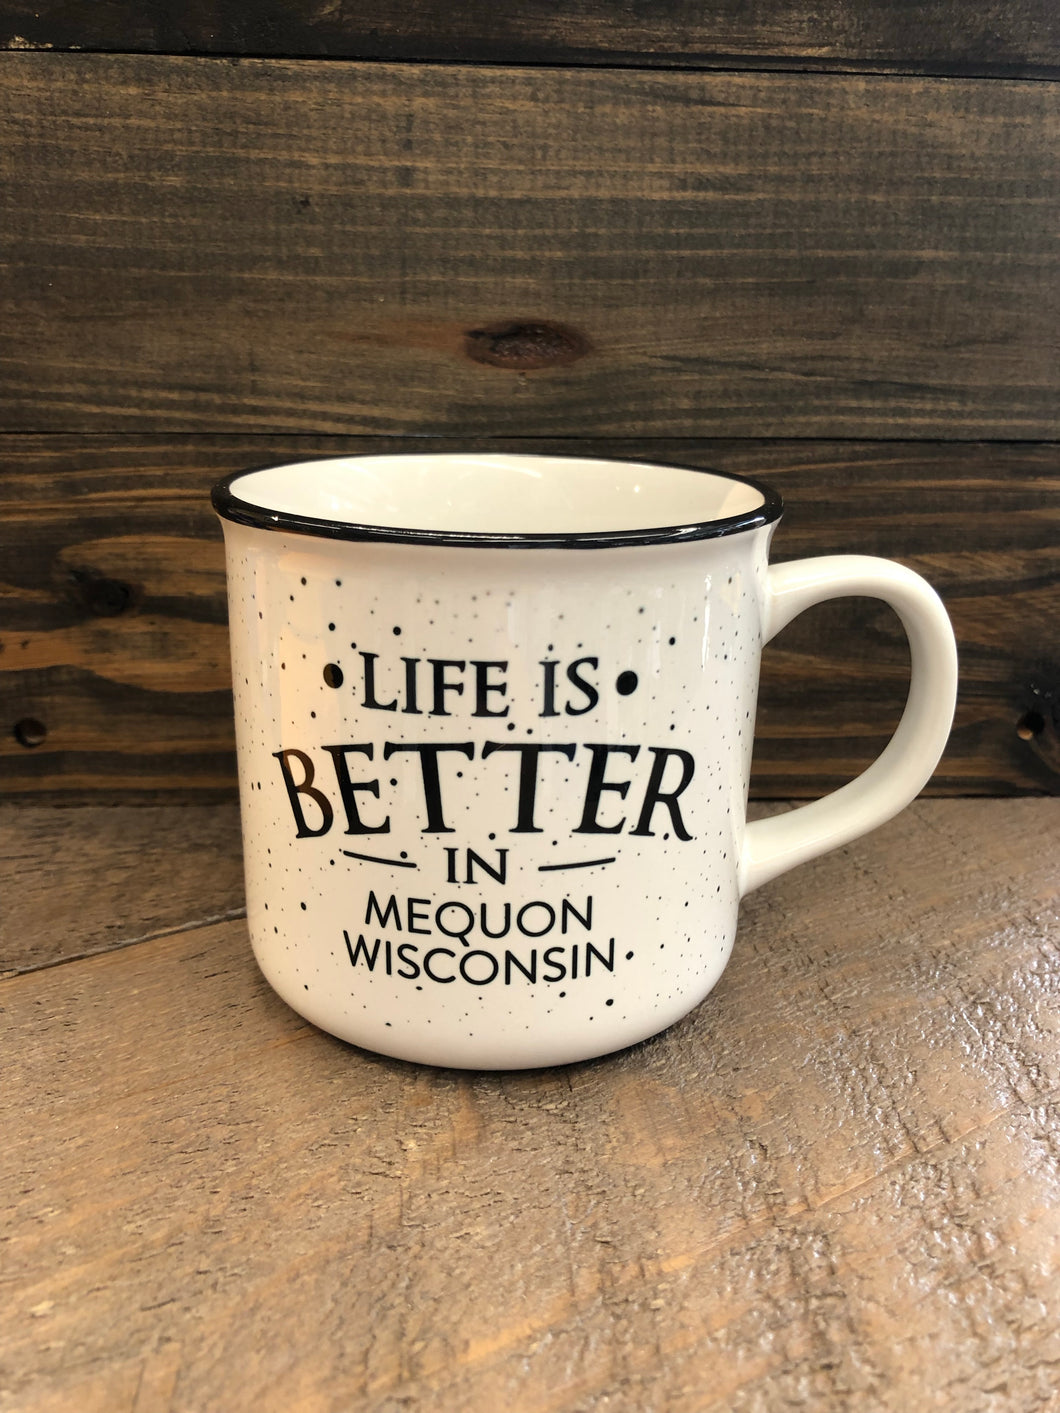 Life is Better in Mequon Wisconsin Mug, 13 oz